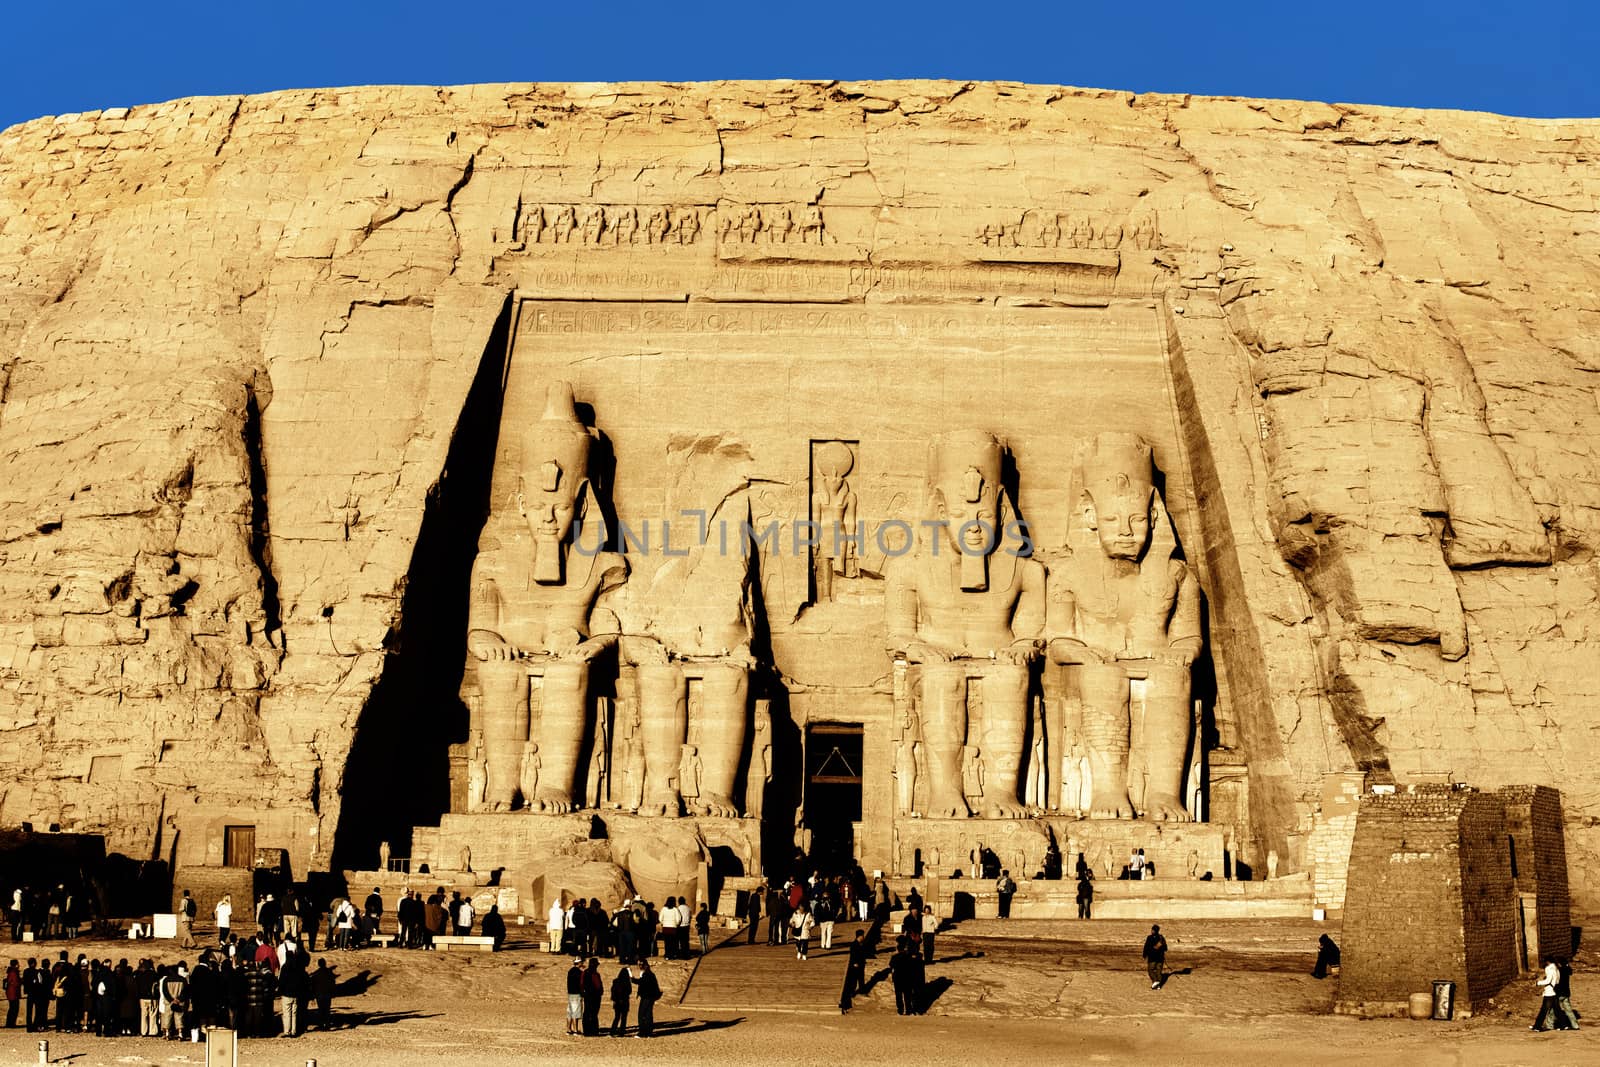 view of the ramses the great 's abou simbel temple along the aswaan lake in egypt